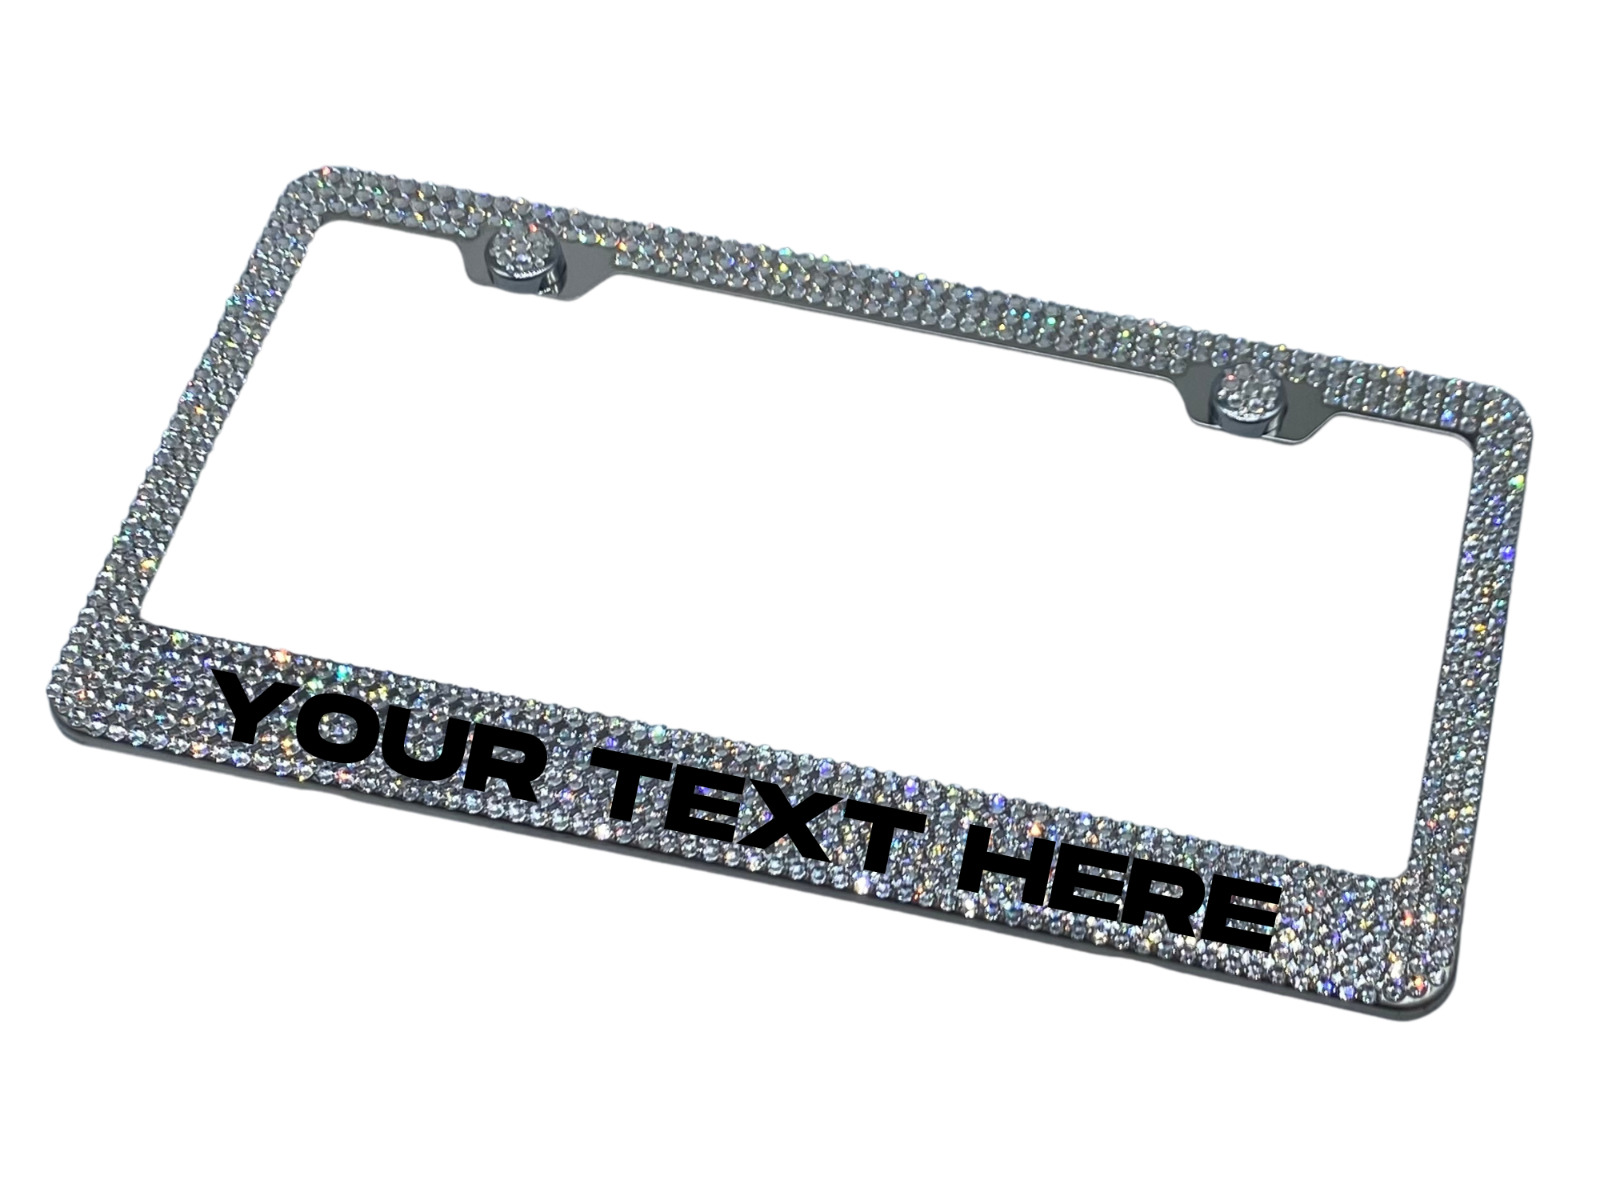 Handmade CUSTOM Bling License Plate made with Clear Swarovski Crystals